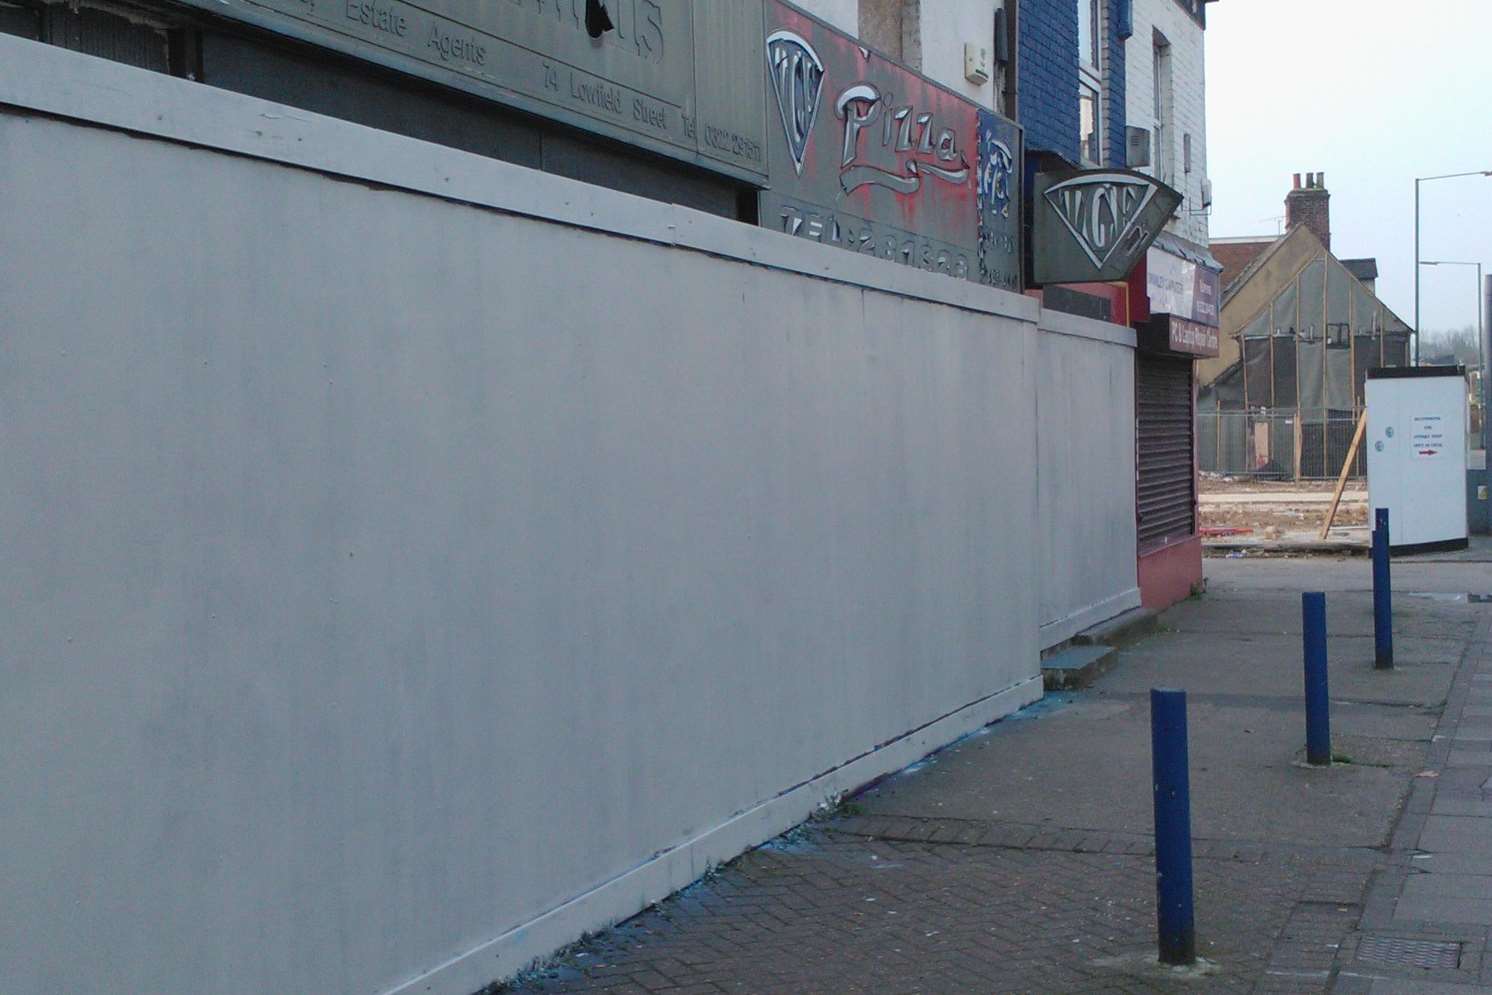 Lowfield Street after the graffiti had been painted over